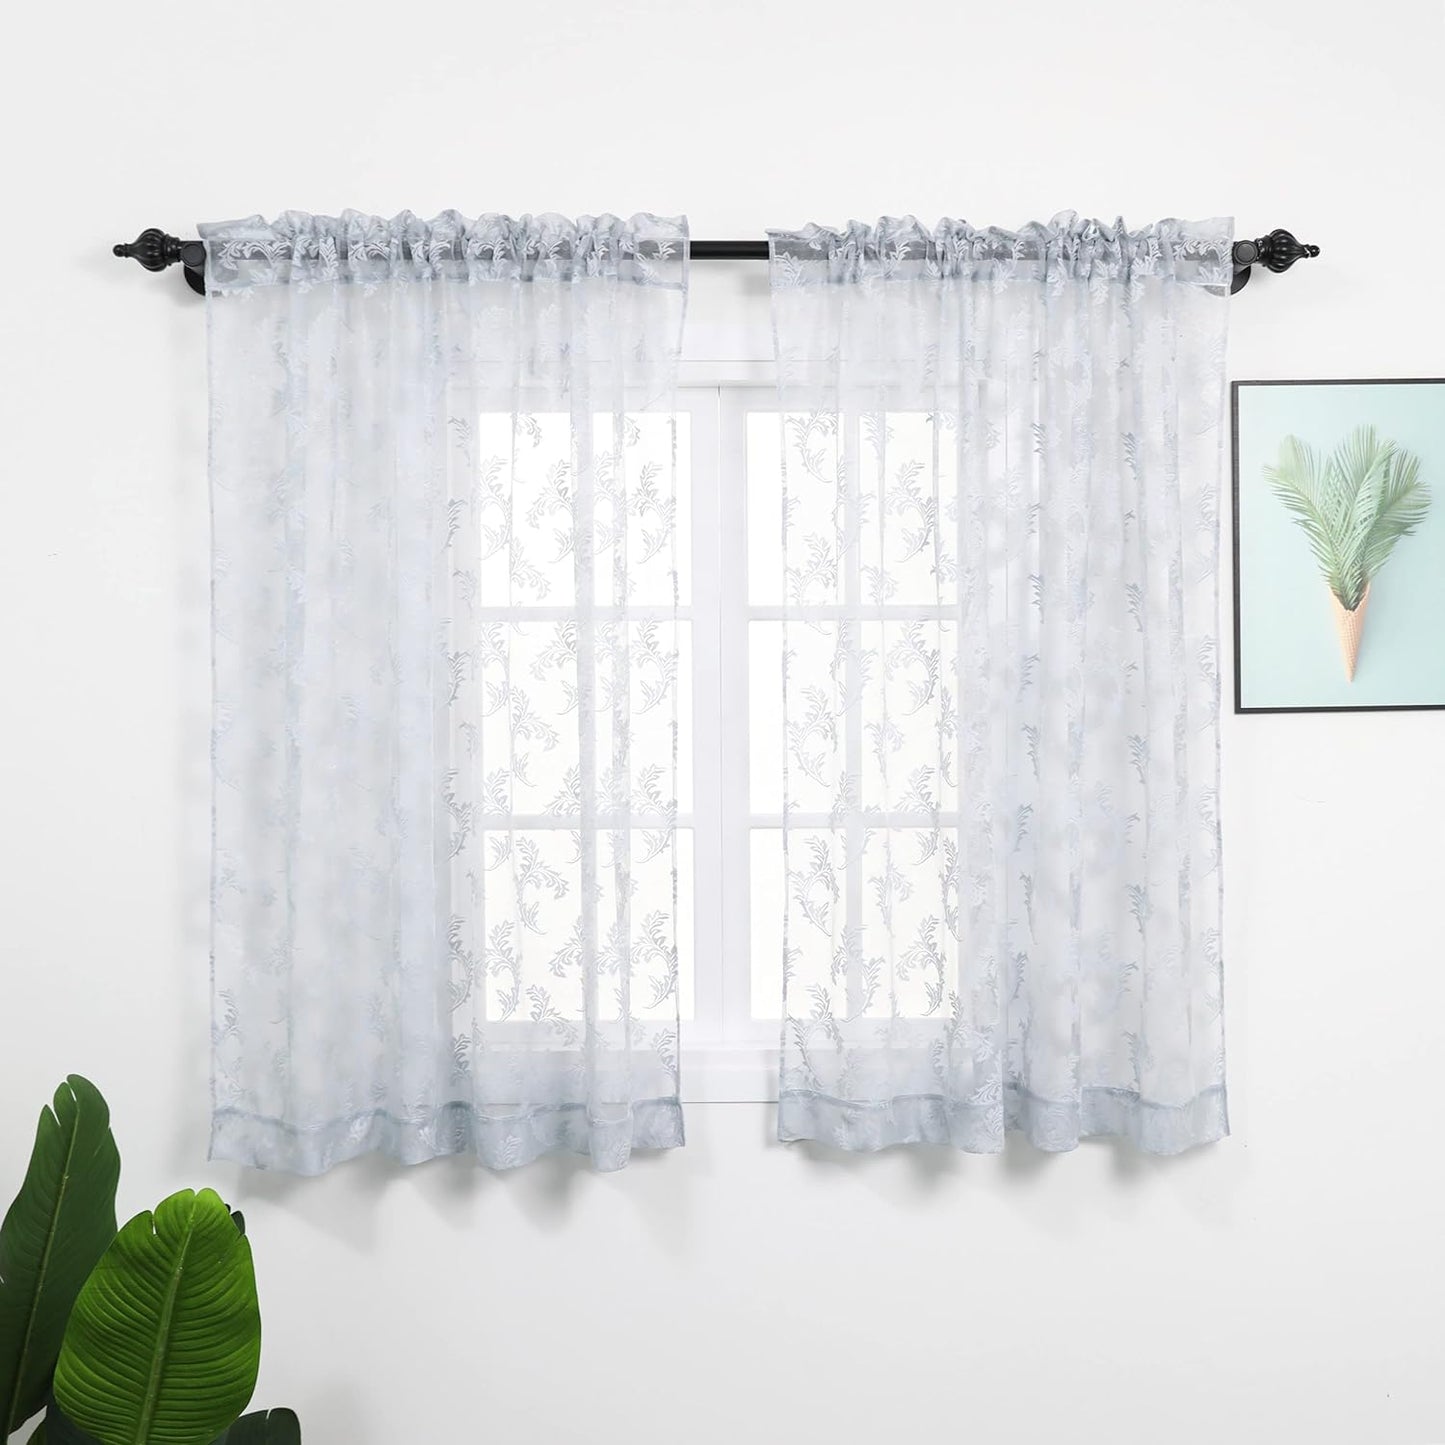 Rloncomix White Sheer Curtains Decorative Leaves Knitted Textured Rod Pocket Semi Light Filtering Airy Window Drapes for Bedroom Kitchen, 52 X 63 Inch, 2 Panels  BAIHT HOME Grey 52"W X 45"L | 2 Pcs 